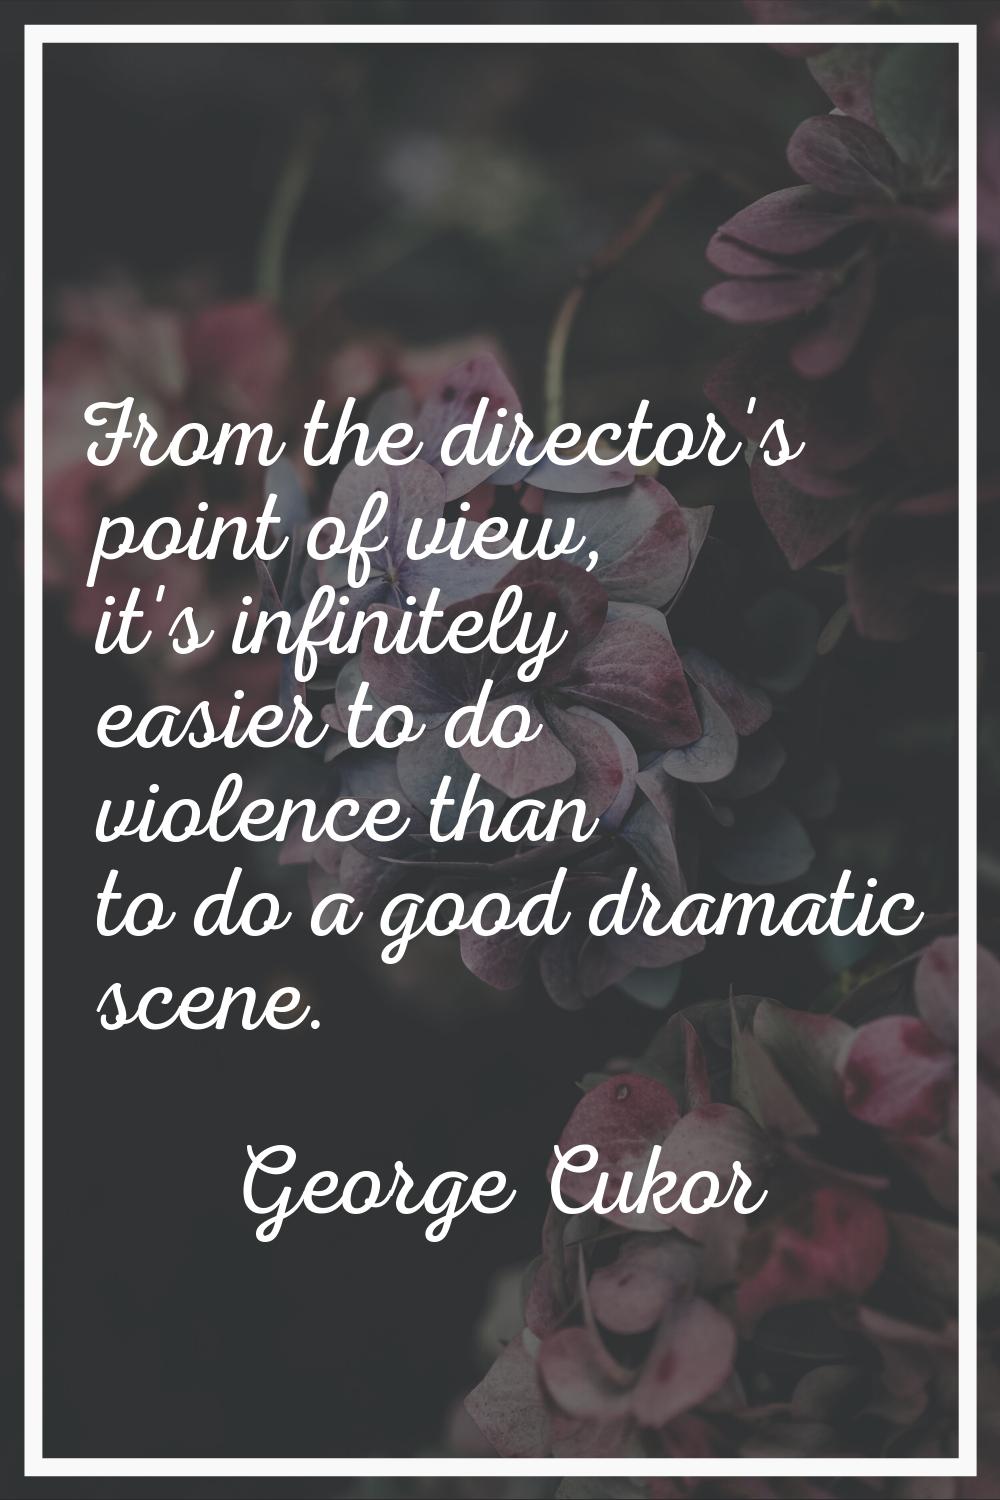 From the director's point of view, it's infinitely easier to do violence than to do a good dramatic